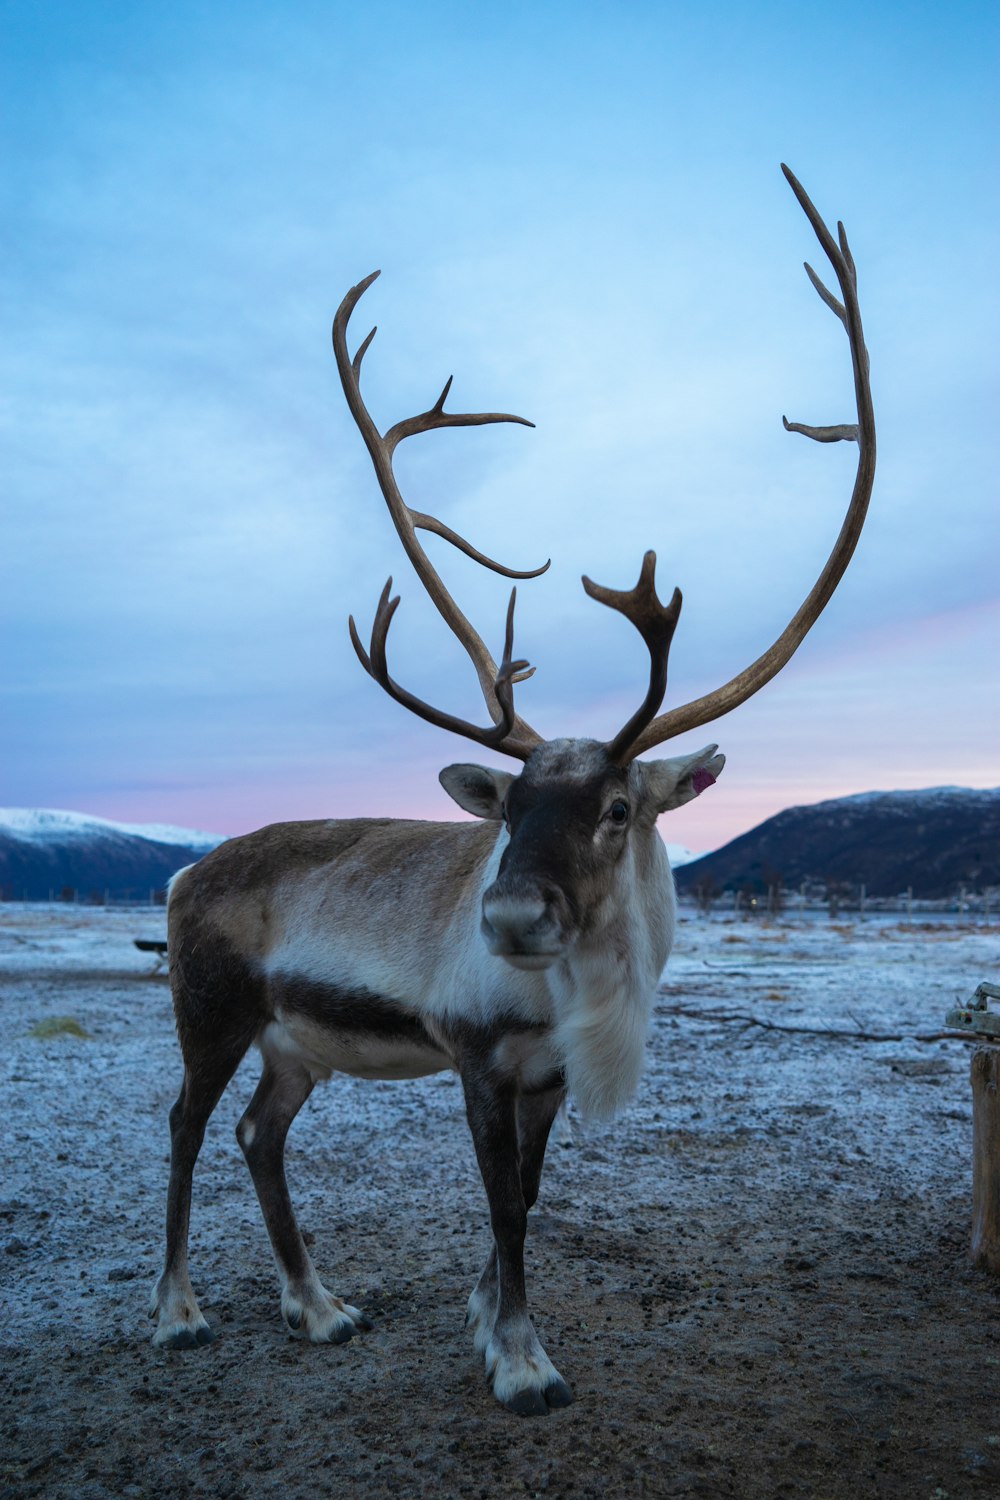 a reindeer standing in the middle of a field